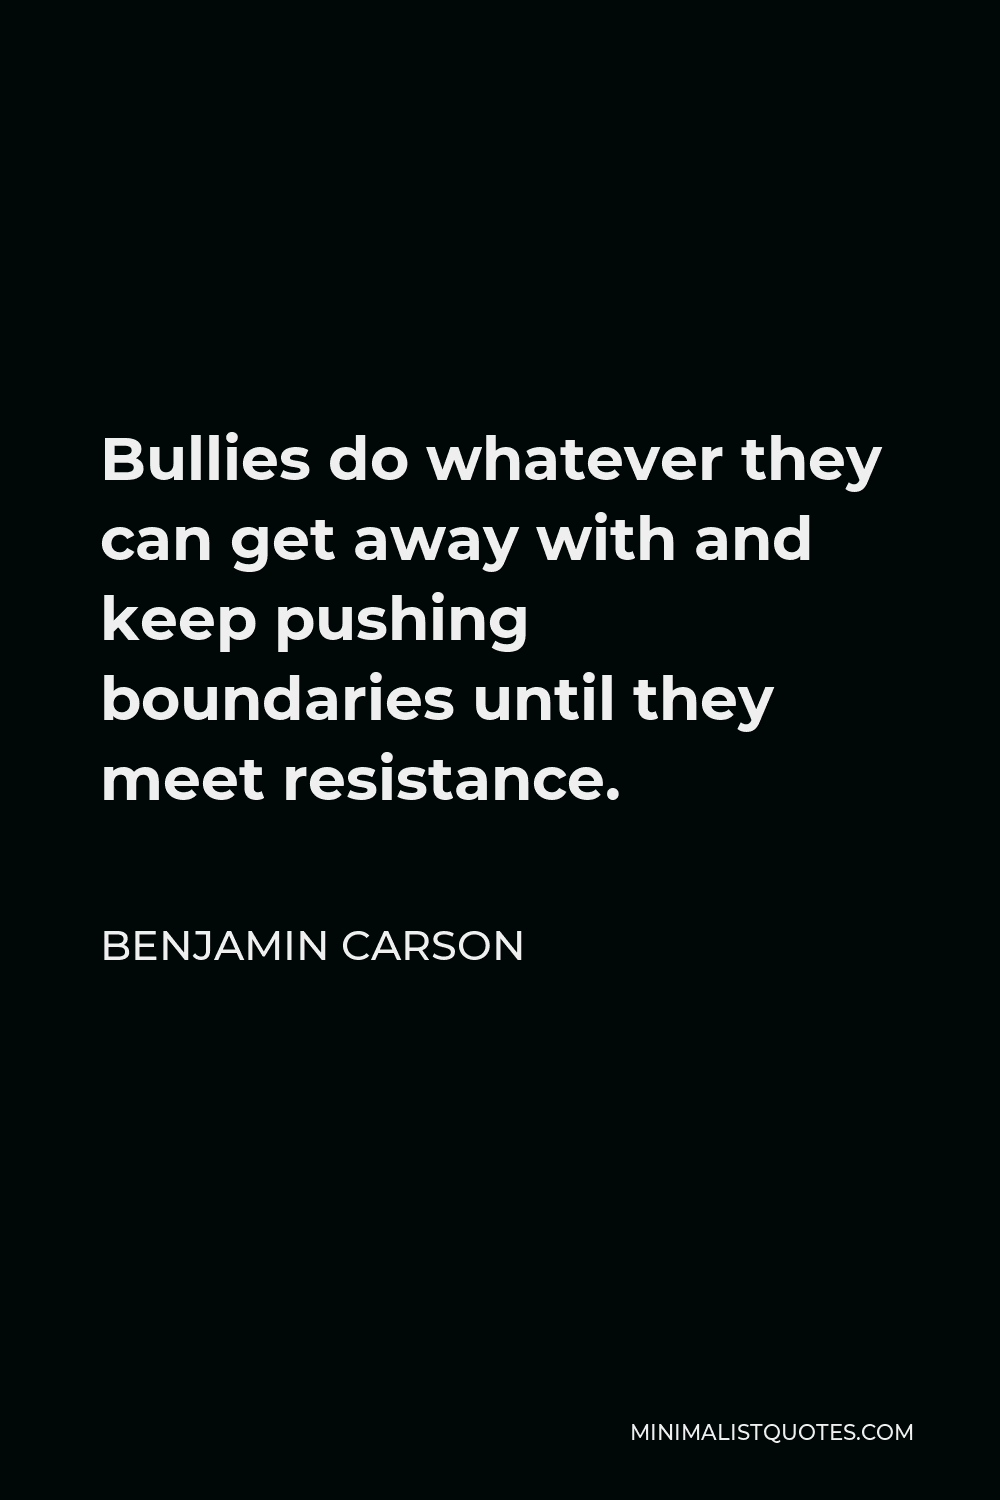 Benjamin Carson Quote - Bullies do whatever they can get away with and keep pushing boundaries until they meet resistance.